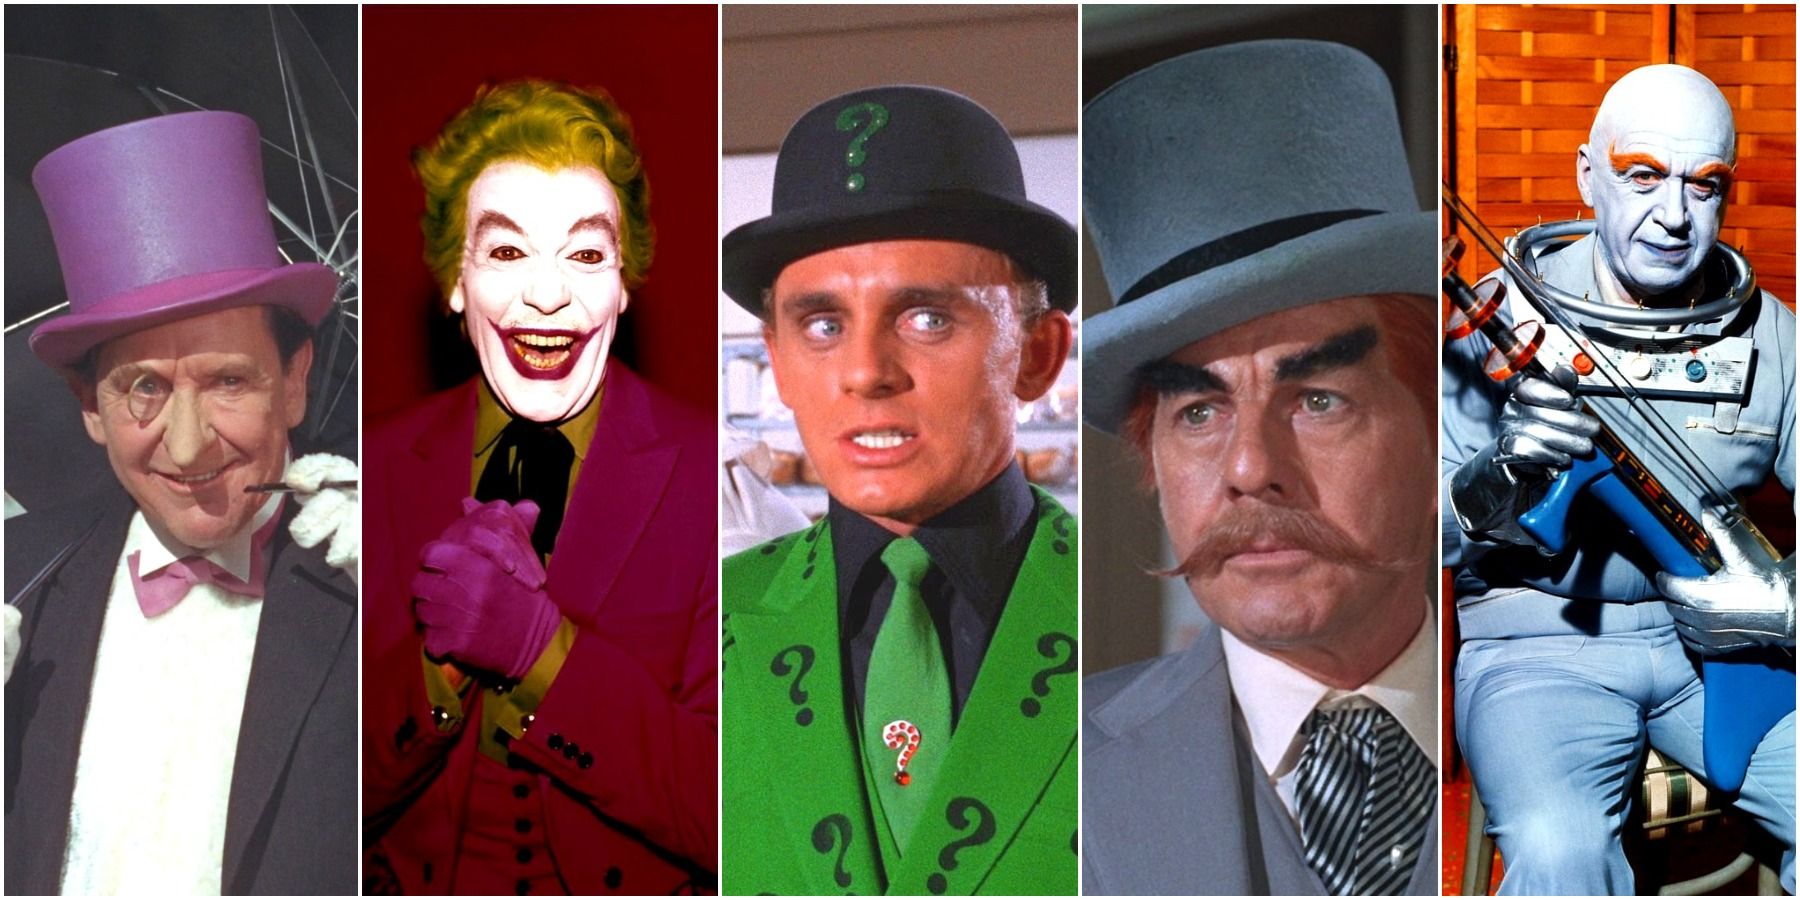 Batman's Rogues Gallery From 1966 Show